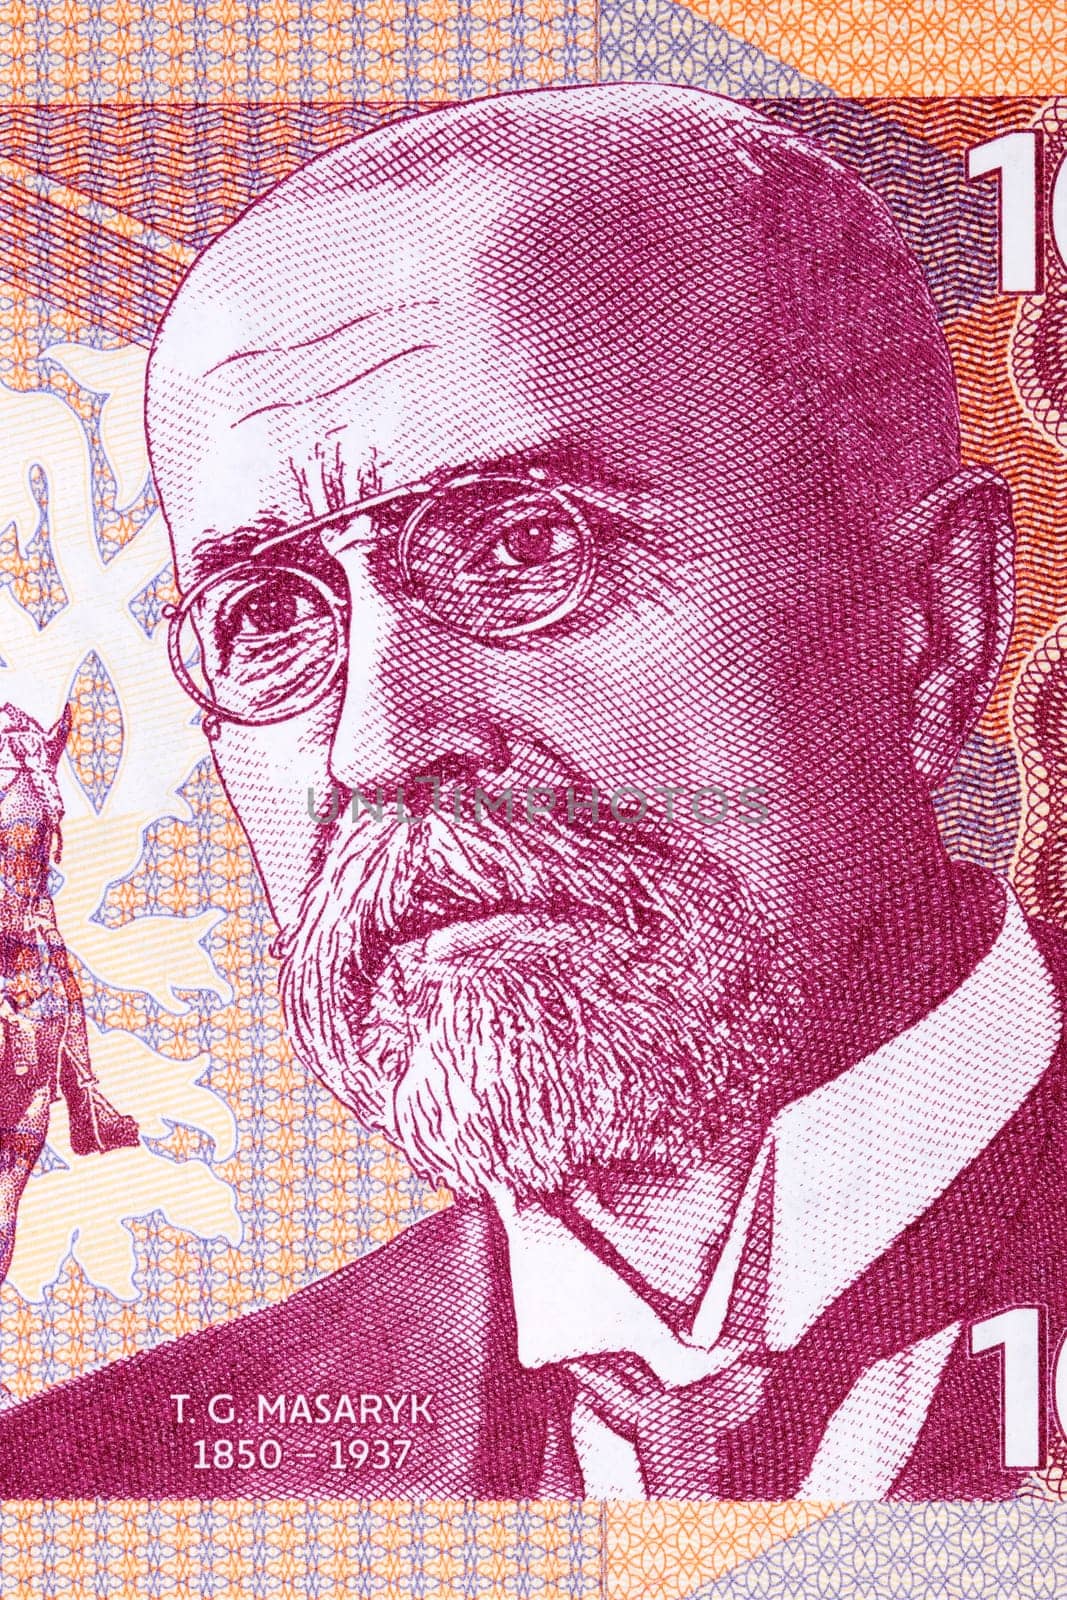 Tomas Garrigue Masaryk a portrait from money by johan10